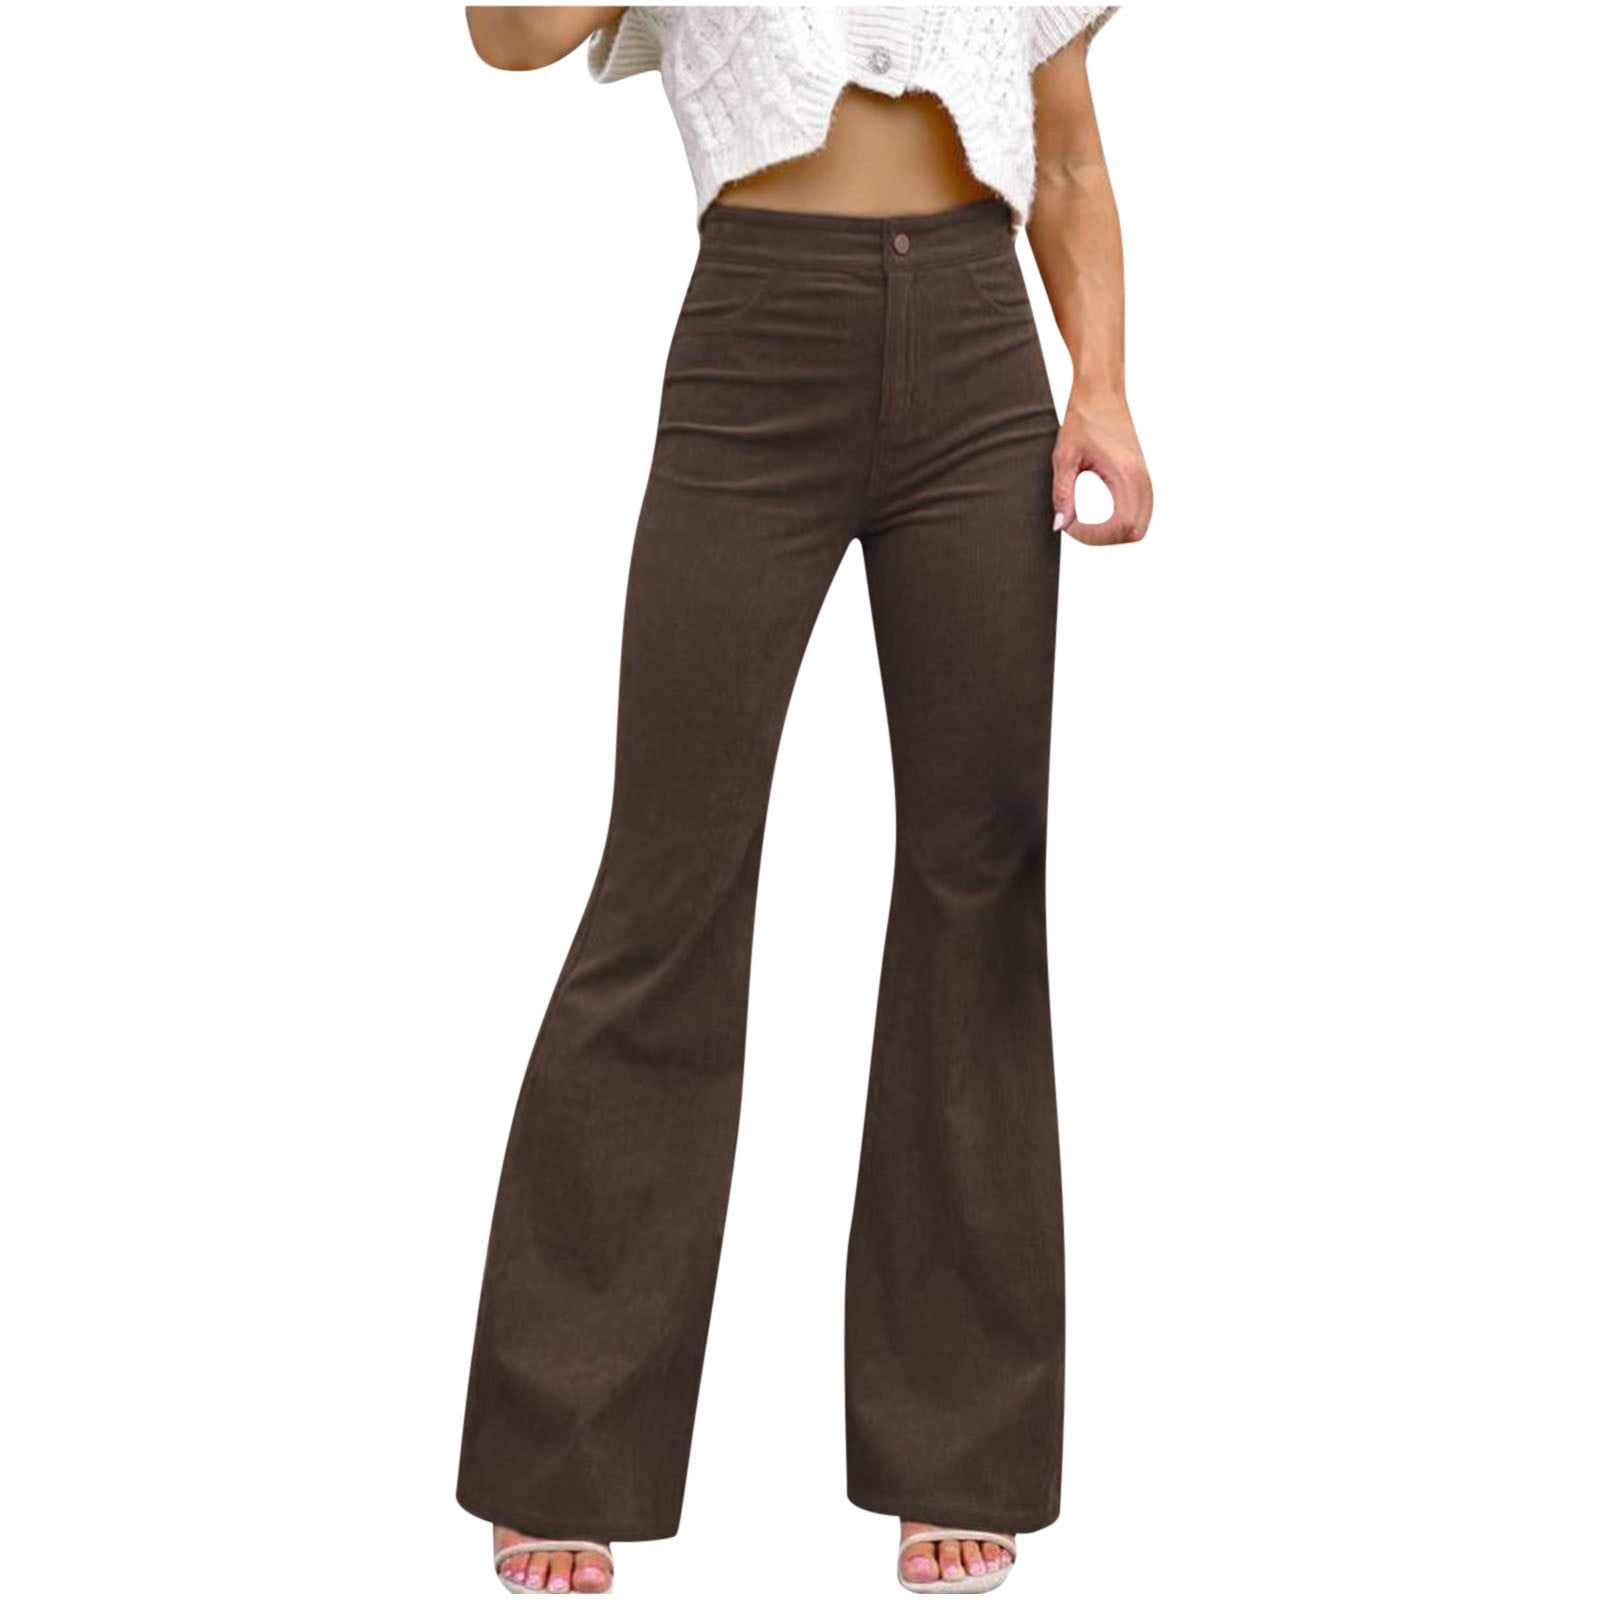 XFLWAM Women's High Waist Flare Pants Casual Wide Leg Bell Bottom Leggings  Trousers Solid Color Plus Size Loose Comfy Lounge Pants with Pockets Brown  M 